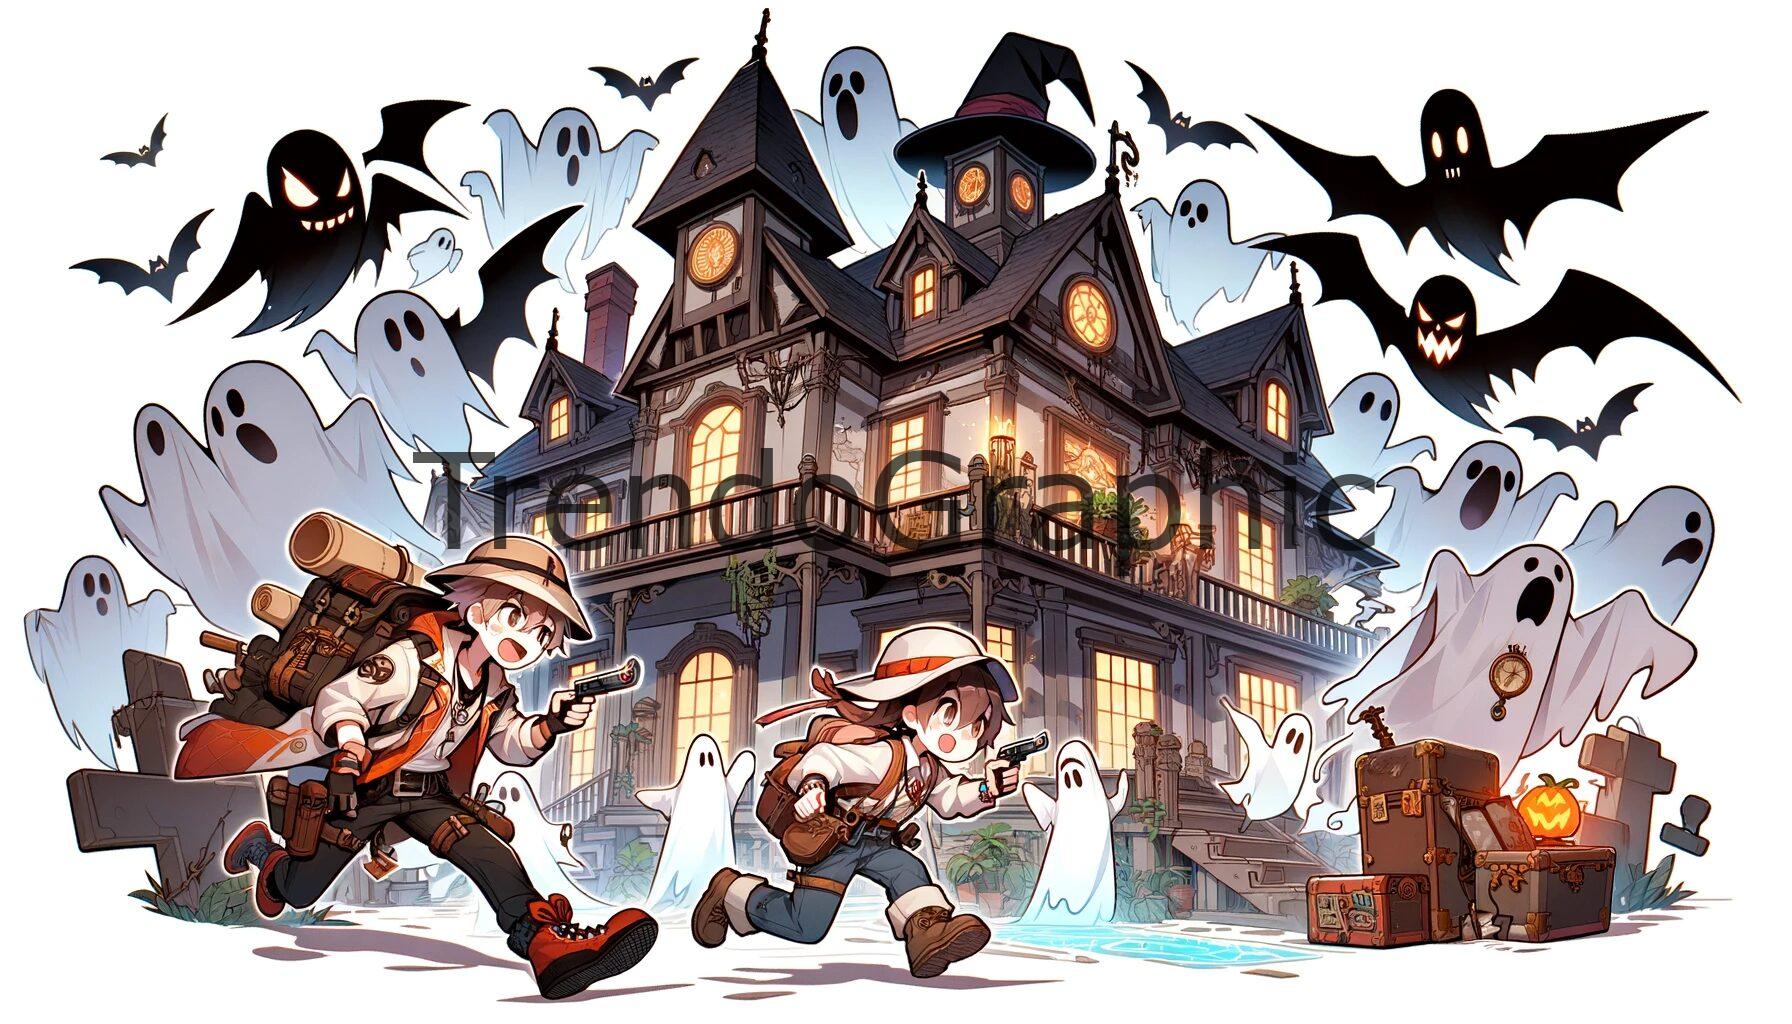 Intense Anime-Style Haunted House Adventure: A Mystery Unraveled